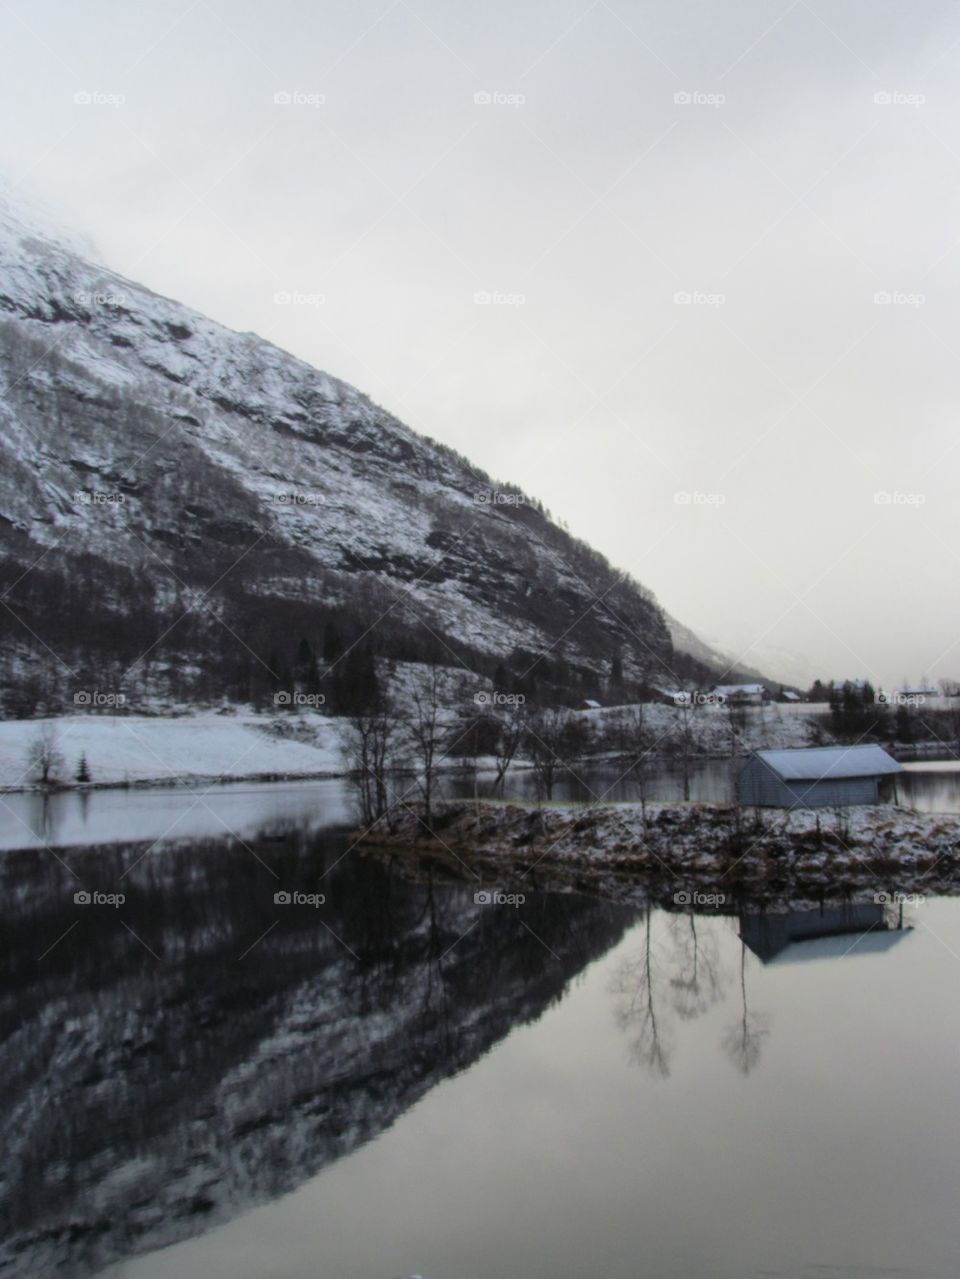 Mountain. Winter. Snow. Reflection. River. Water. Grey. Cold.